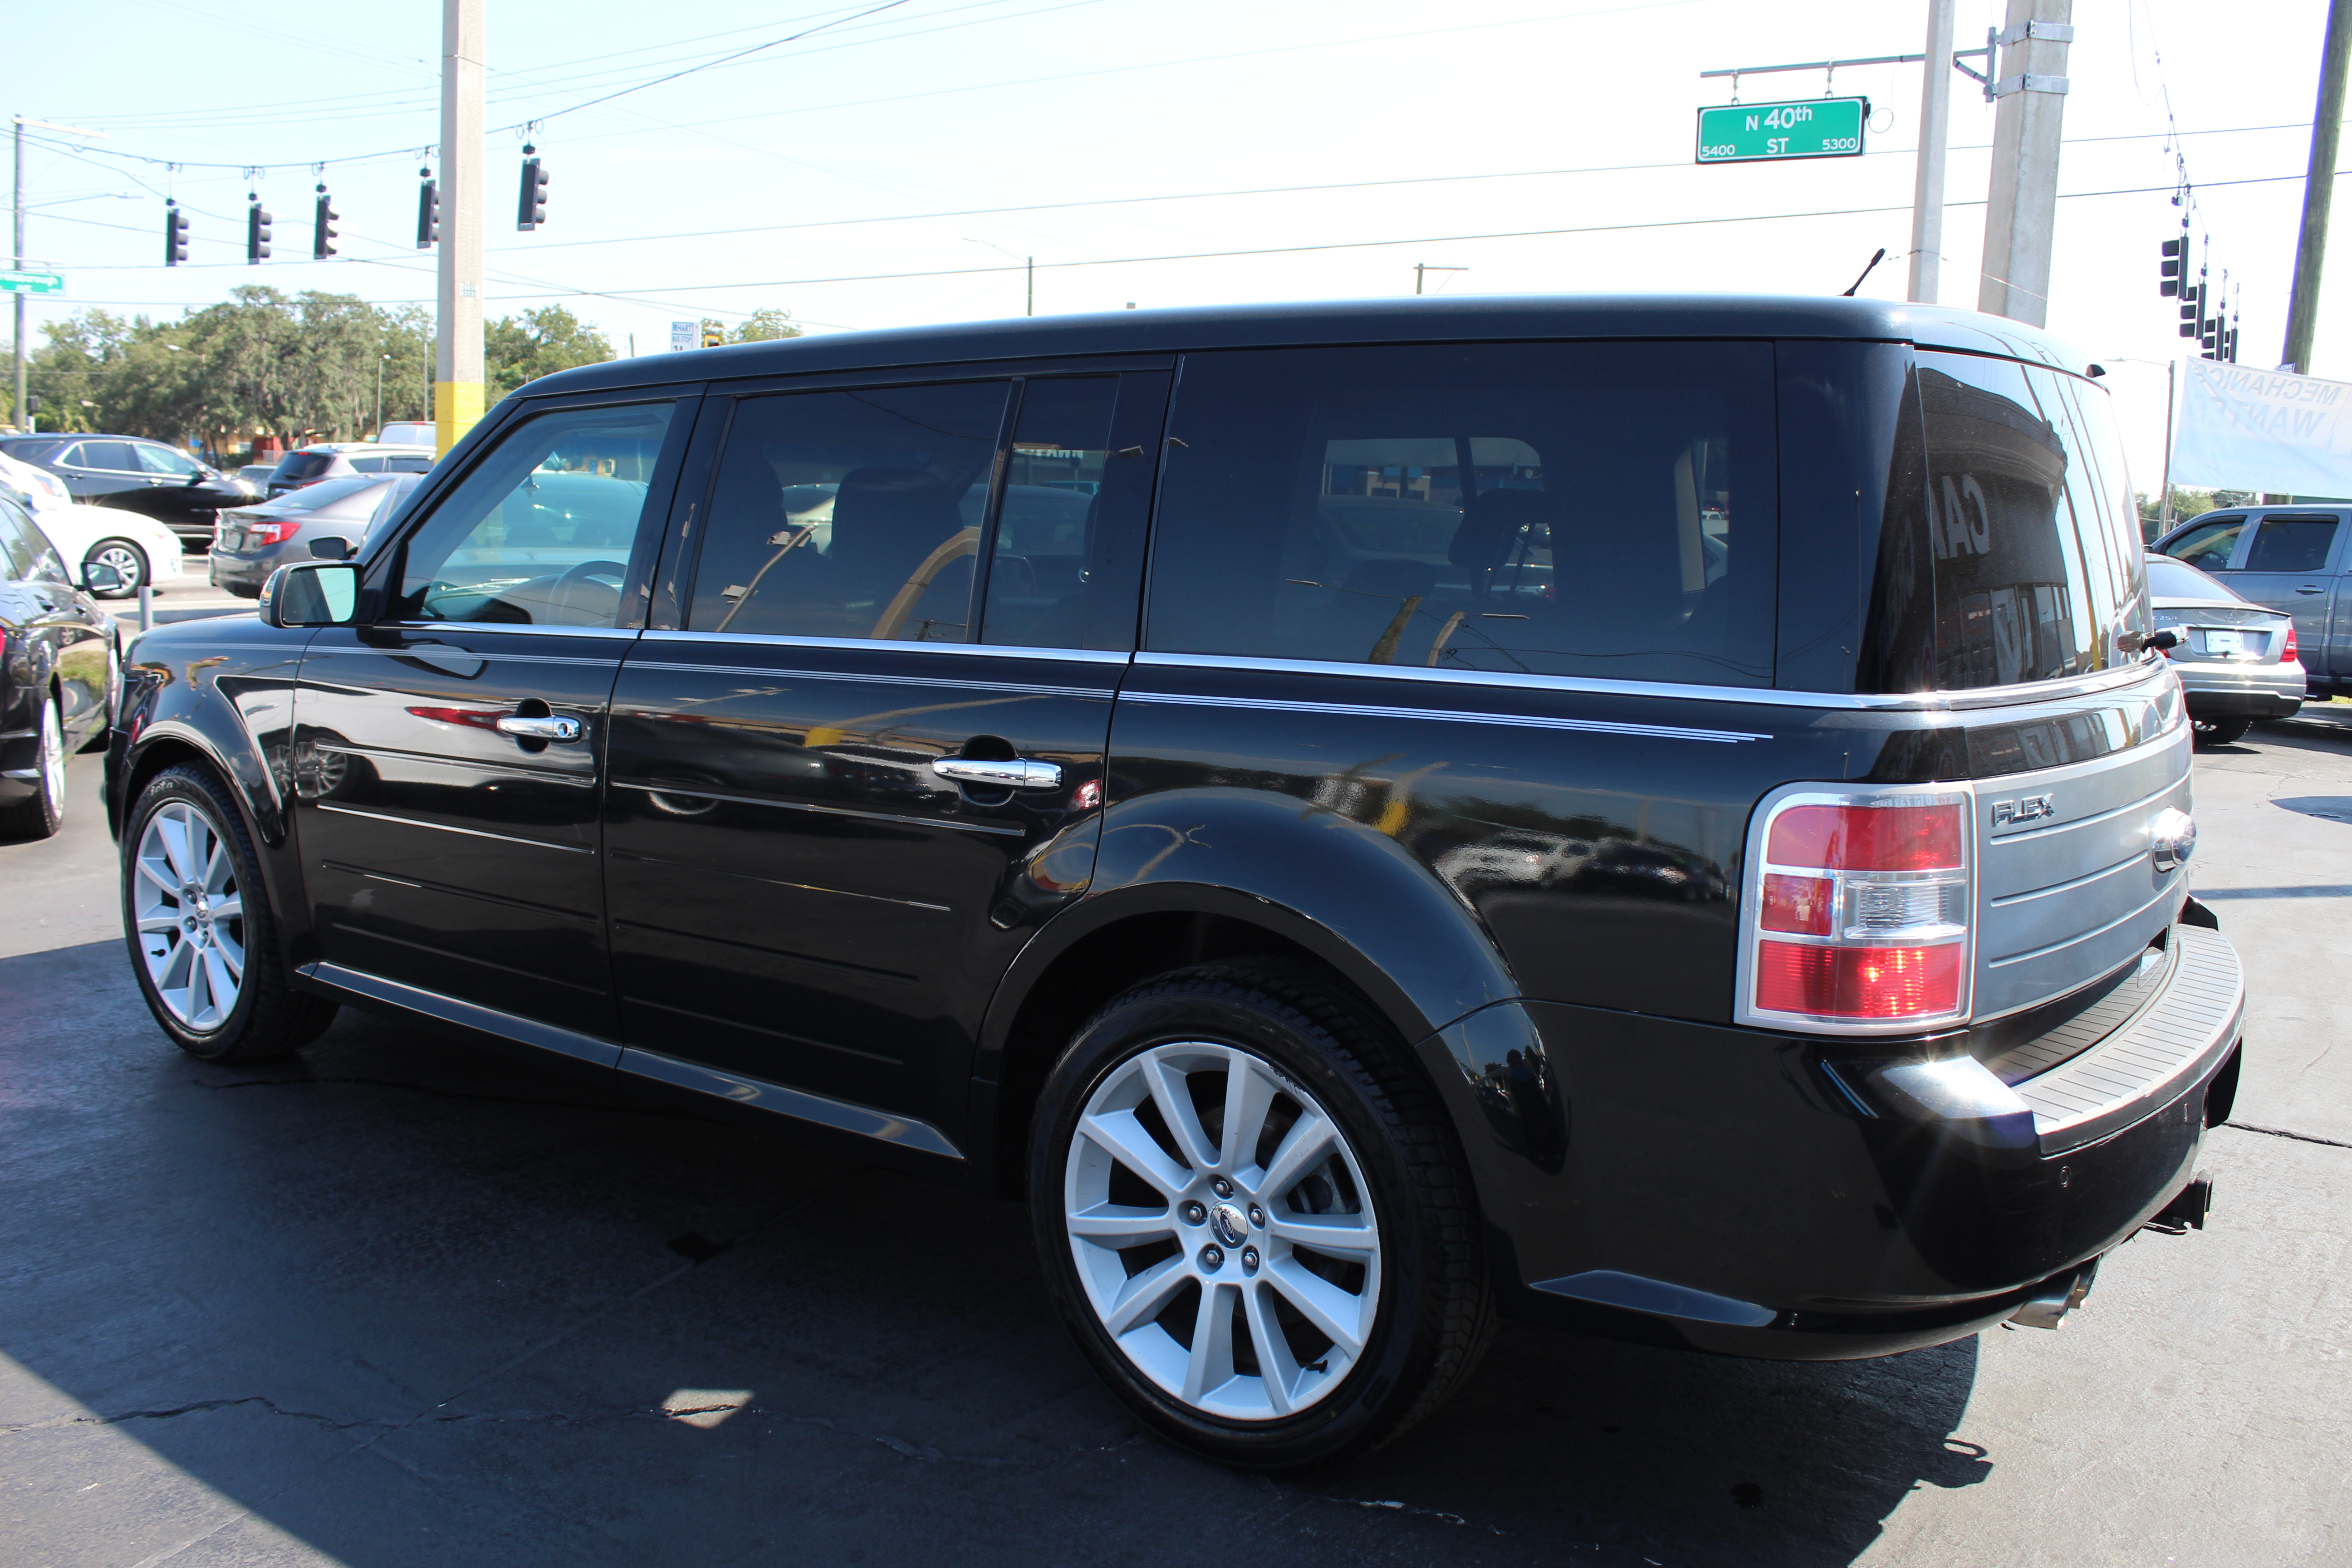 Pre-Owned 2010 Ford Flex Limited Wagon 4 Dr. in Tampa #1276G | Car